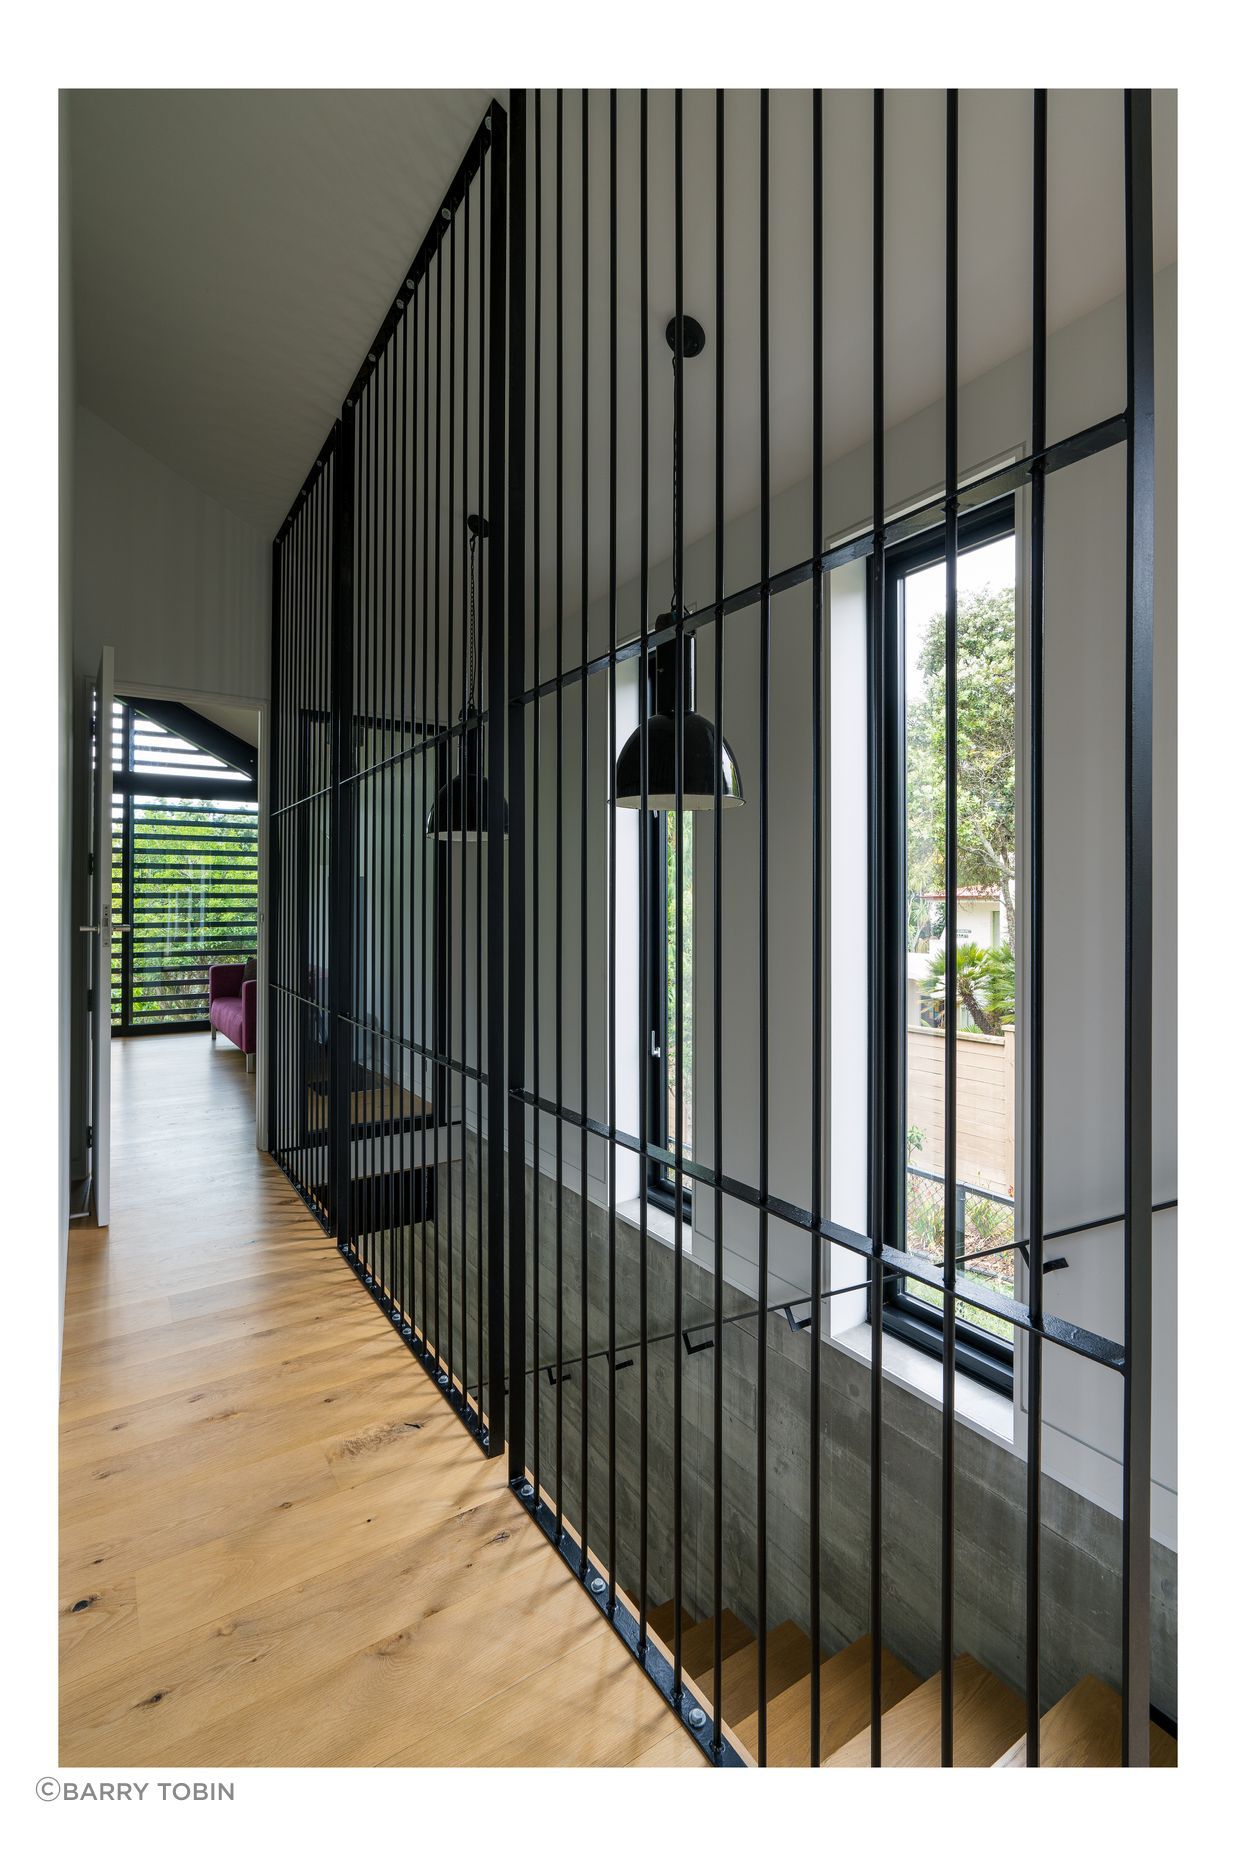 Clive wanted to separate the stairwell but not put in a solid wall. He considered black netting before trying the metal rods, framing them into panels to stop them flexing. “It was an aesthetic that just developed, and met my design idea to keep the hallway as open as possible.”